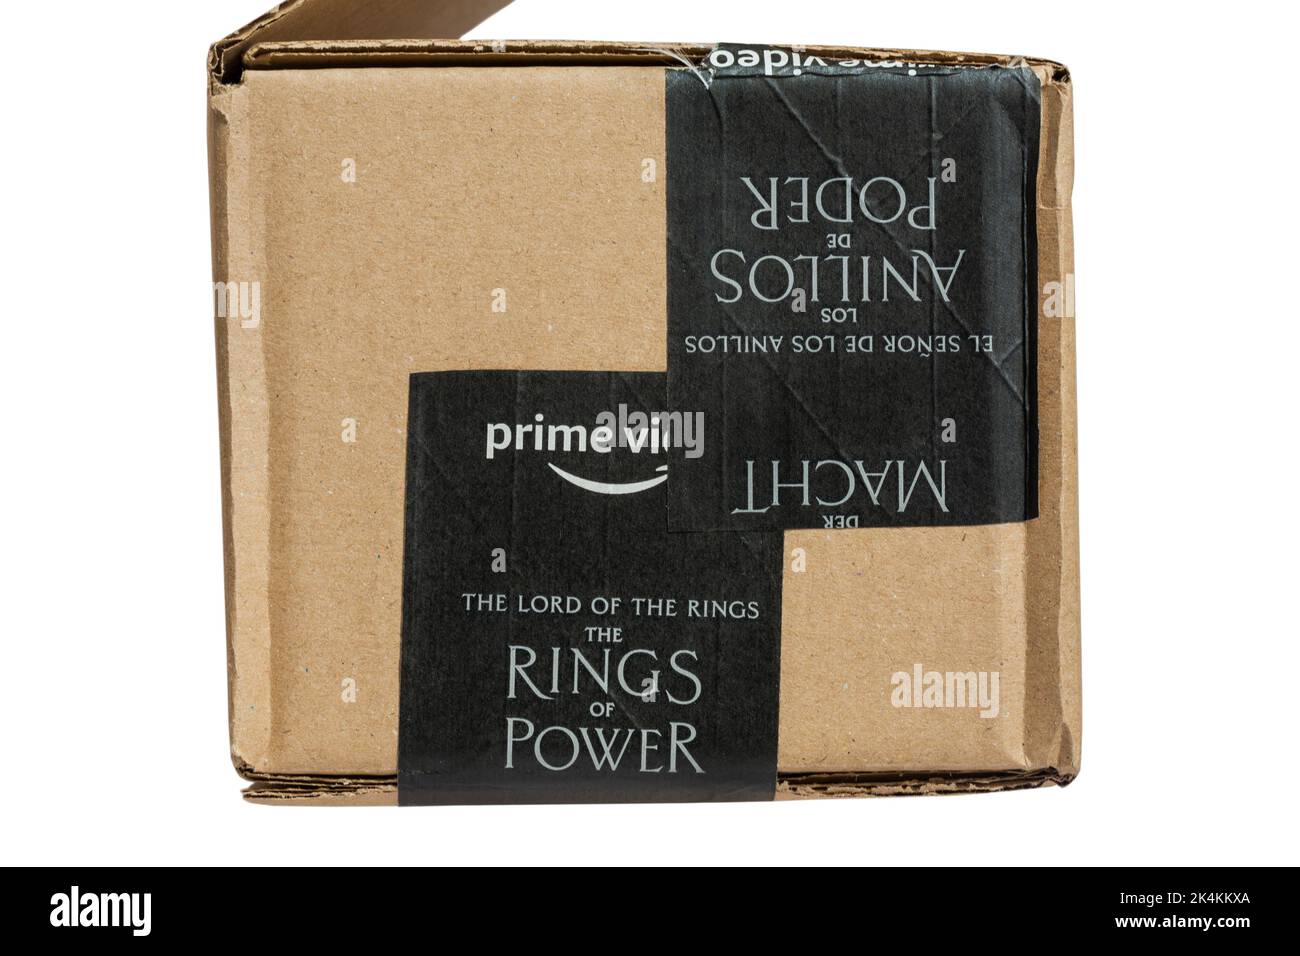 prime video The Lord of the Rings the Rings of Power tape in different languages on parcel from Amazon Stock Photo